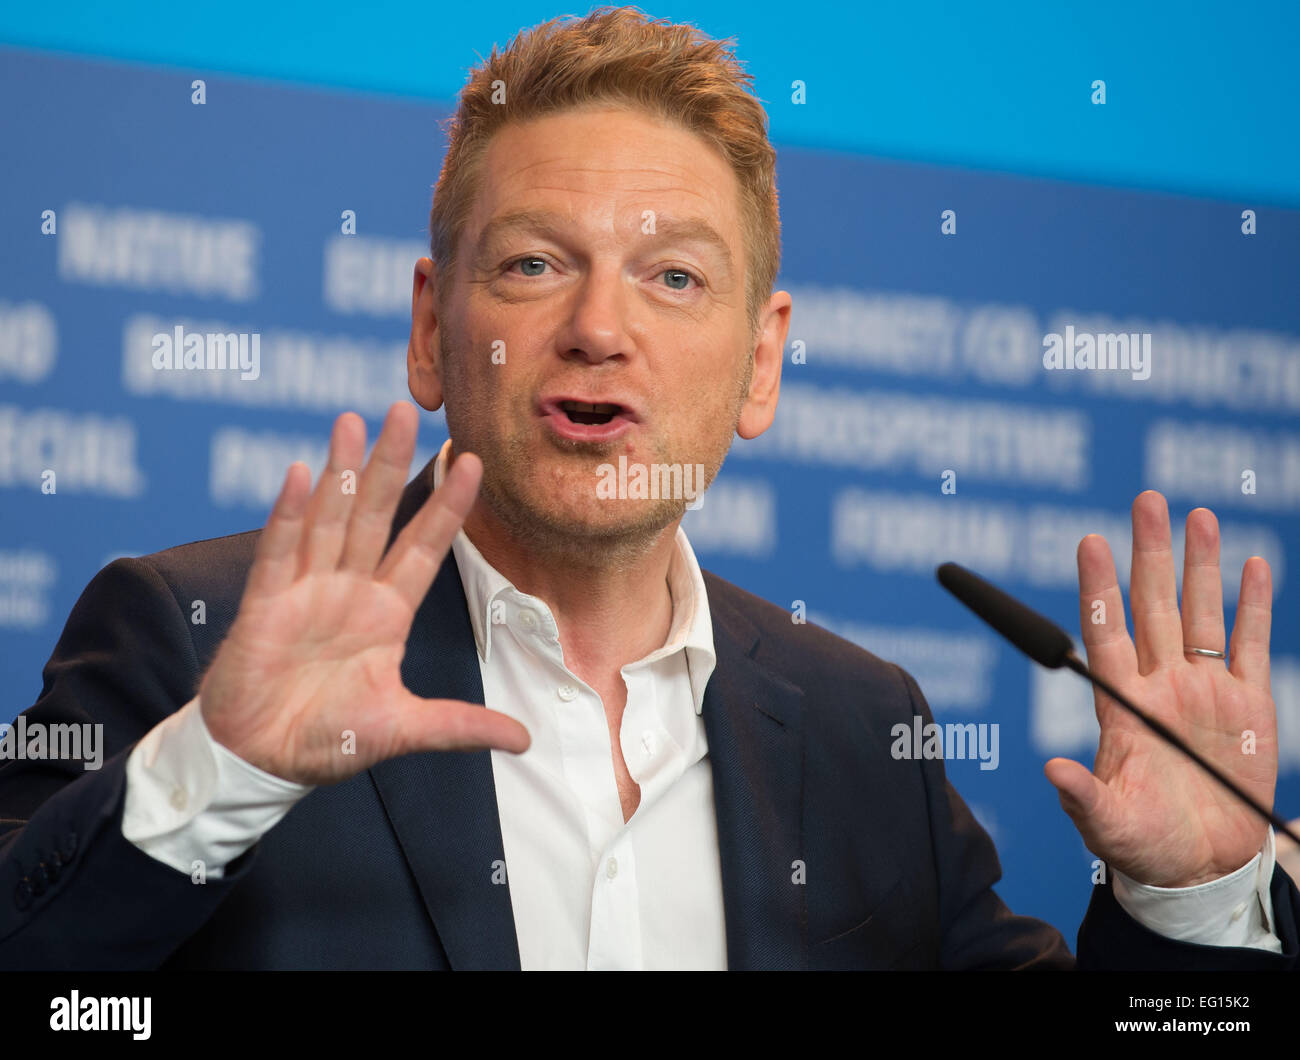 British director Kenneth Branagh attends the press conference for 'Cinderella' during the 65th annual Berlin Film Festival, in Berlin, Germany, 13 February 2015. The movie is presented in the Official Competition (out of competition) at the Berlinale, which runs from 05 to 15 February 2015. PHOTO: TIM BRAKEMEIER/dpa Stock Photo